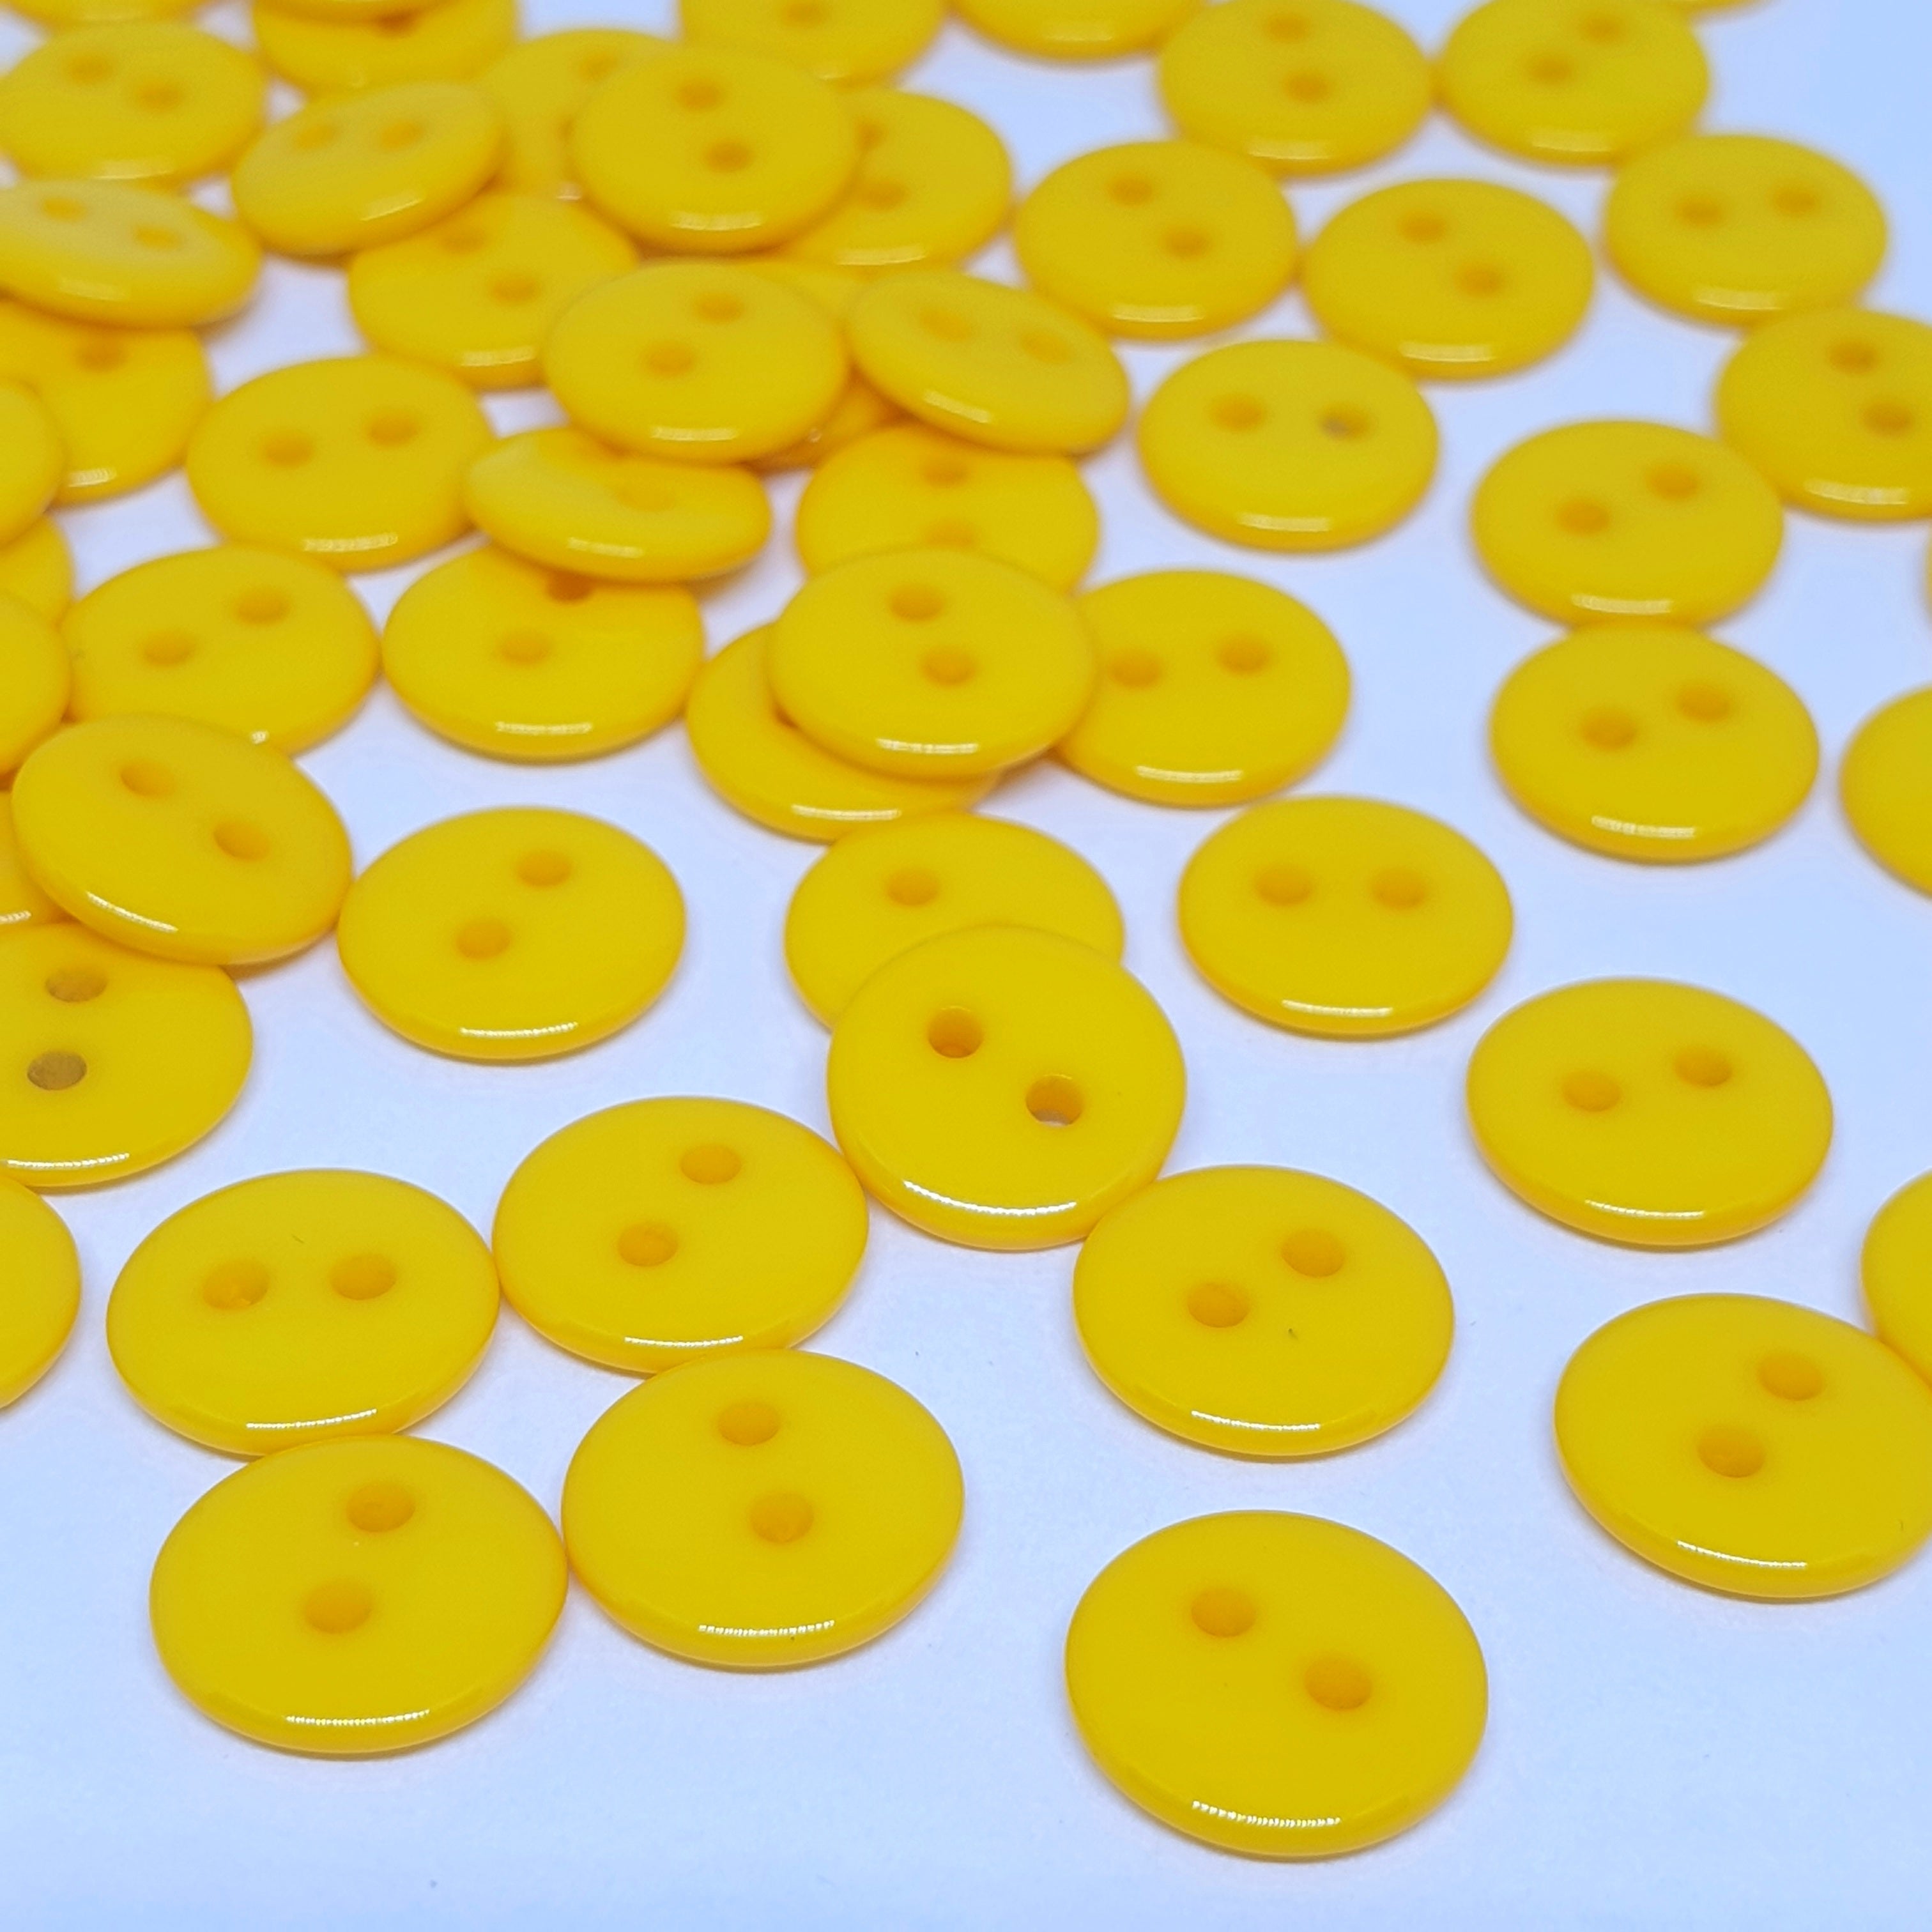 MajorCrafts 120pcs 10mm Dark Yellow 2 Holes Small Round Resin Sewing Buttons B8